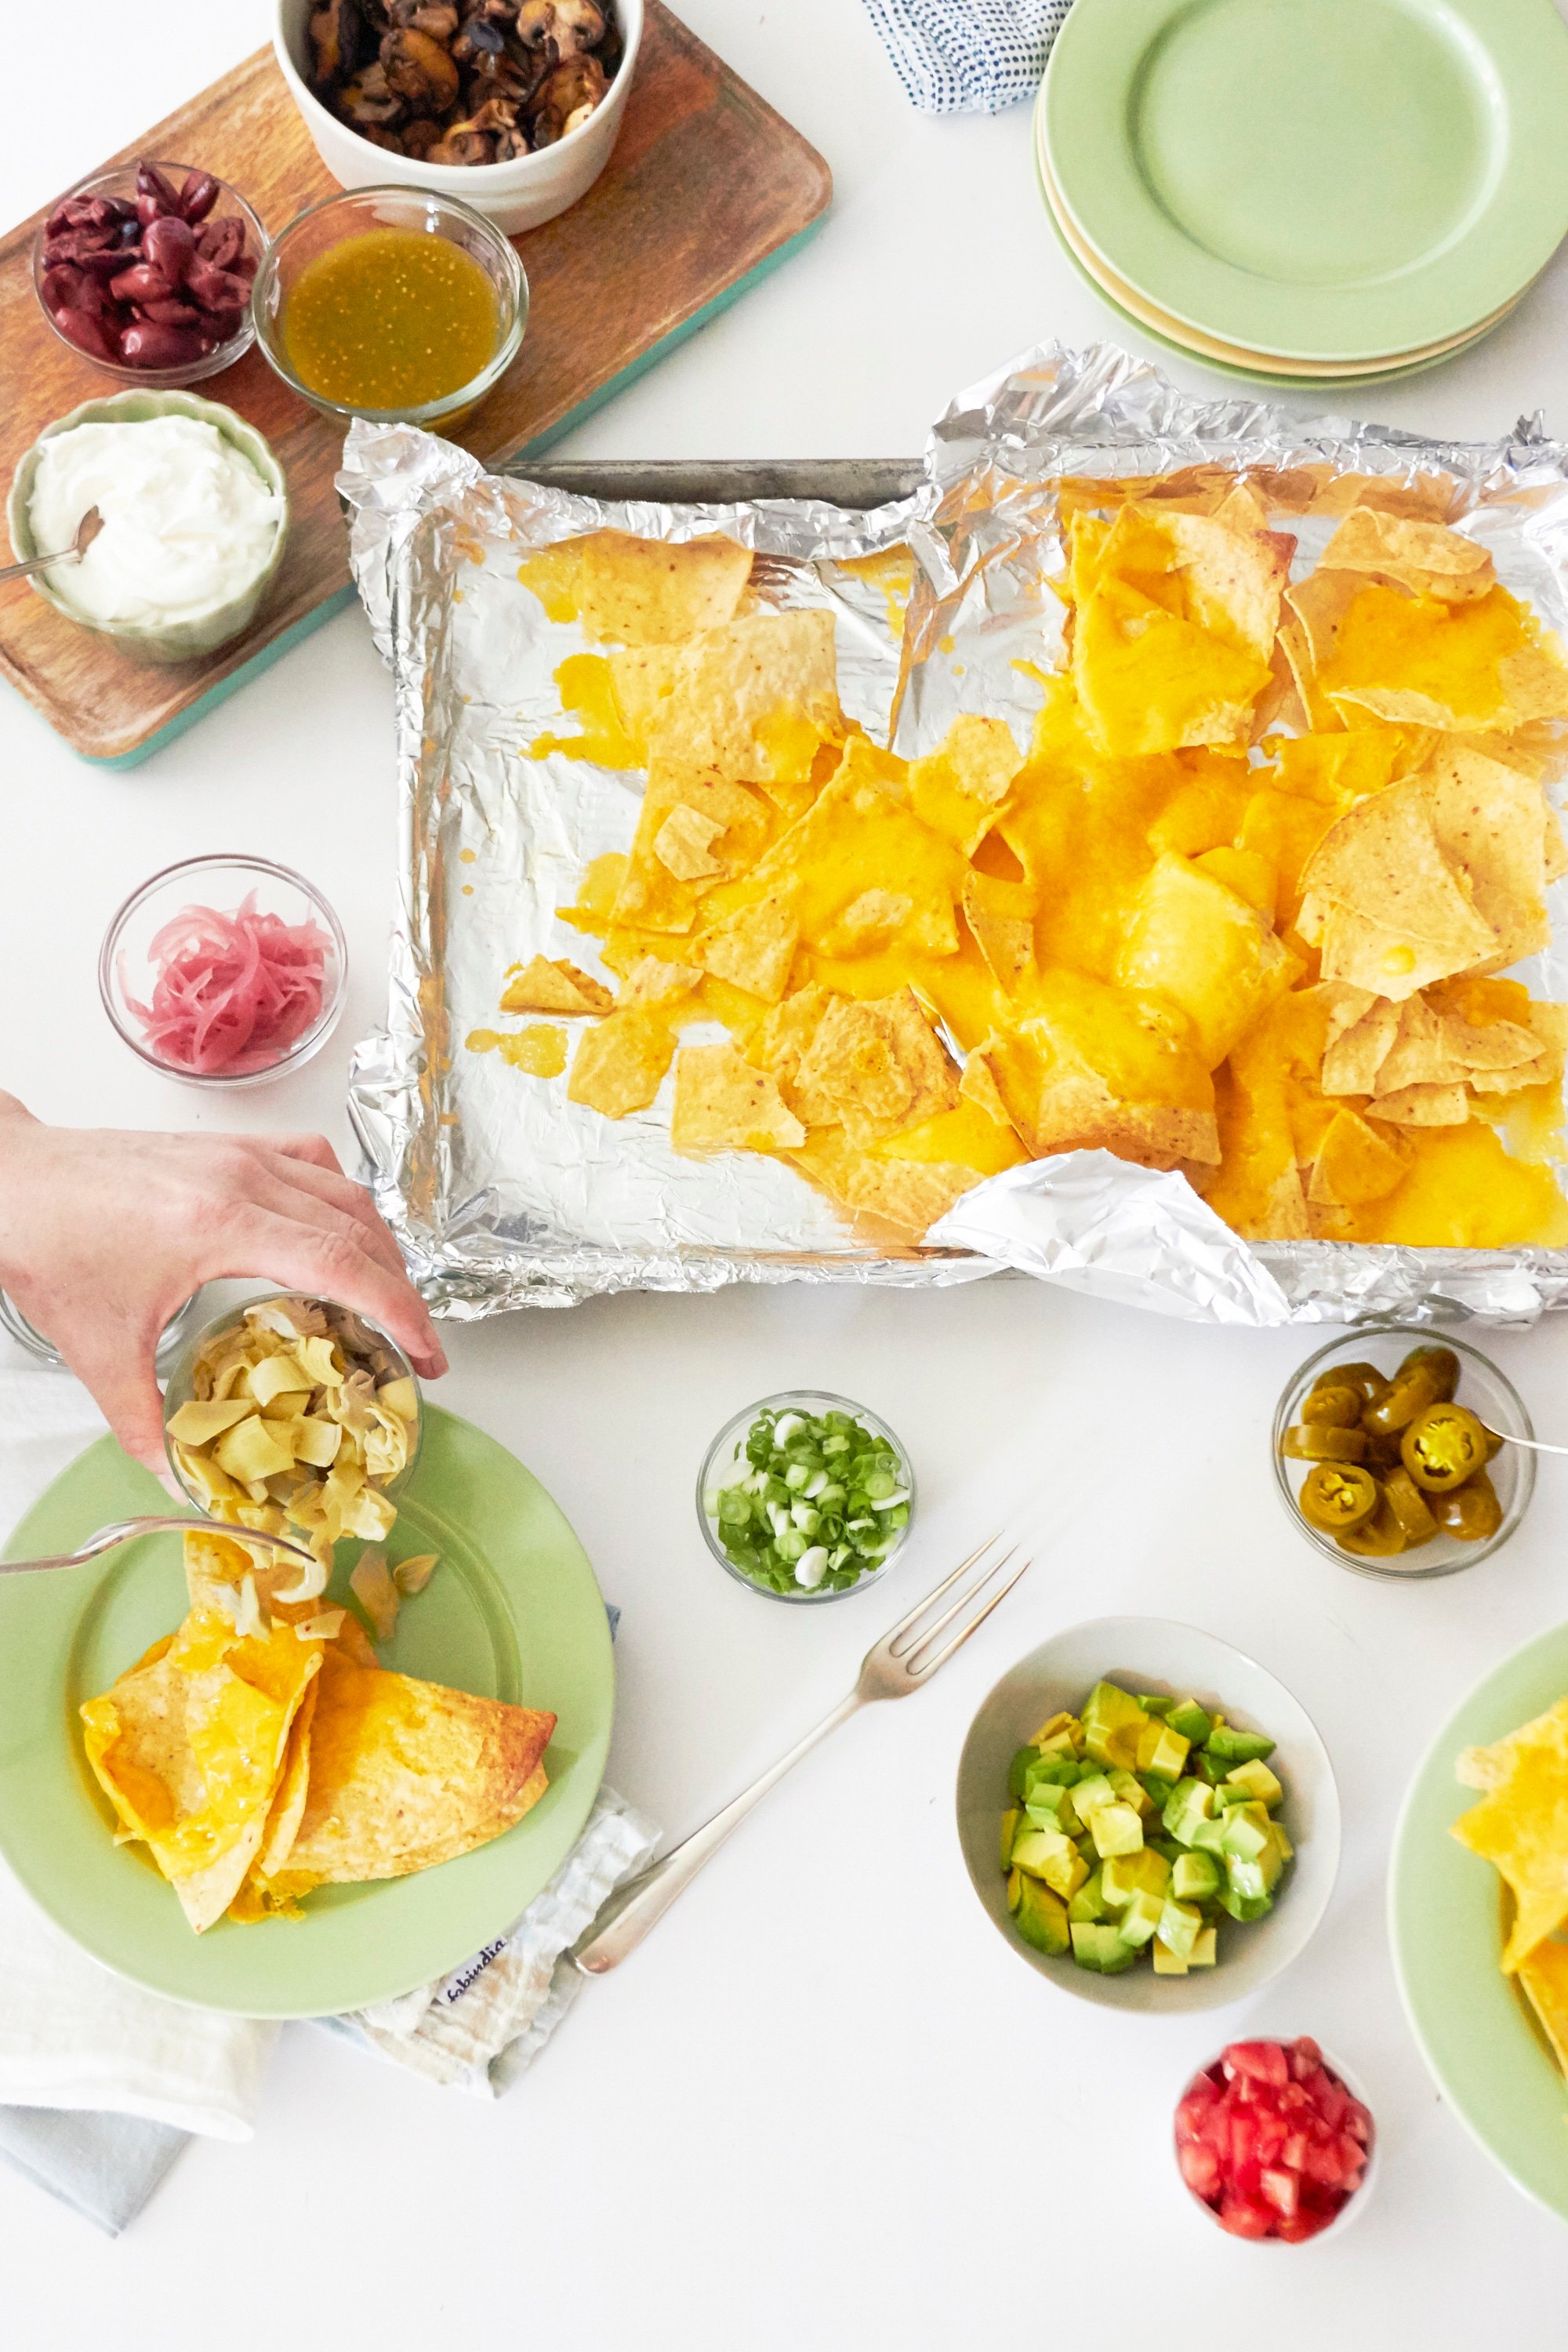 Woman adding some diced avocado hearts to a plate of nachos, with more nachos and toppings nearby